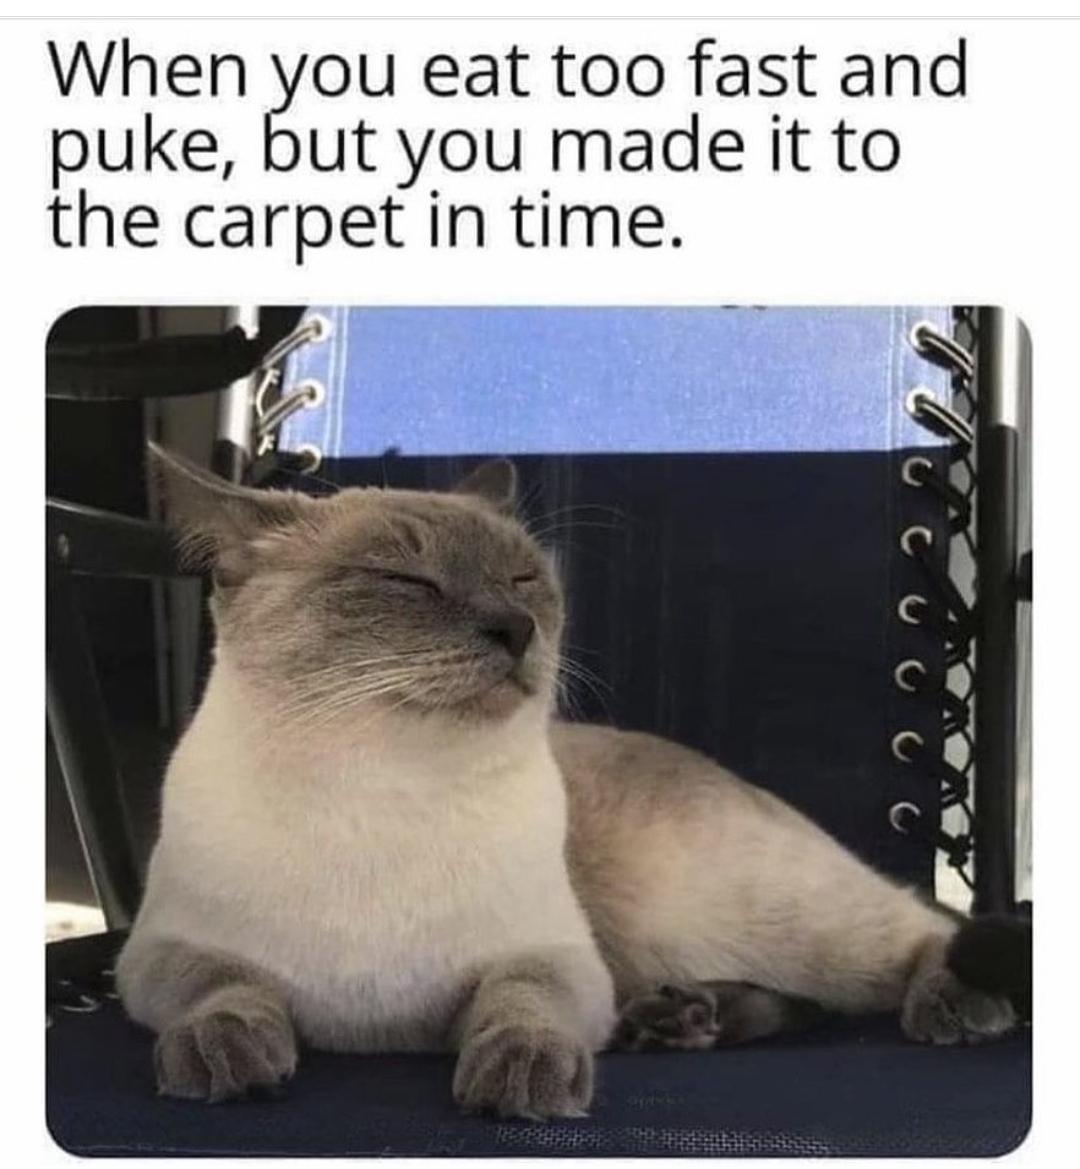 funny memes - dank memes - funny cat memes - When you eat too fast and puke, but you made it to the carpet in time. C